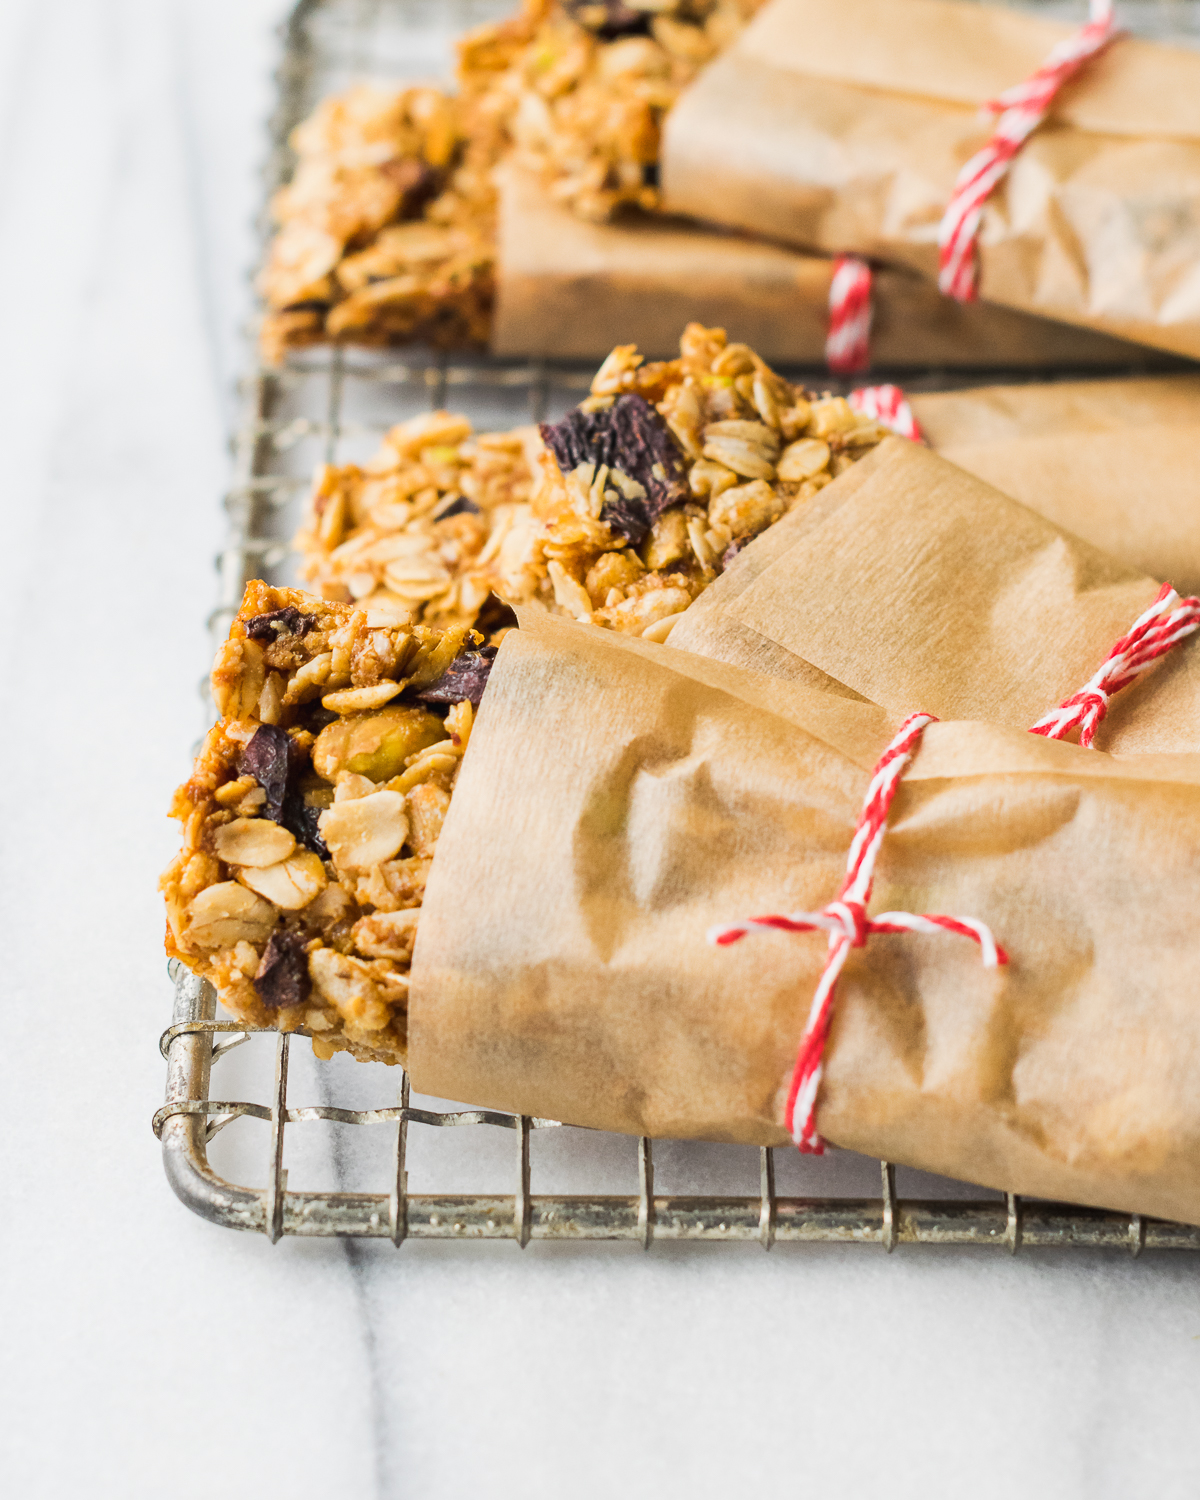 Homemade granola bars wrapped with paper and twine.